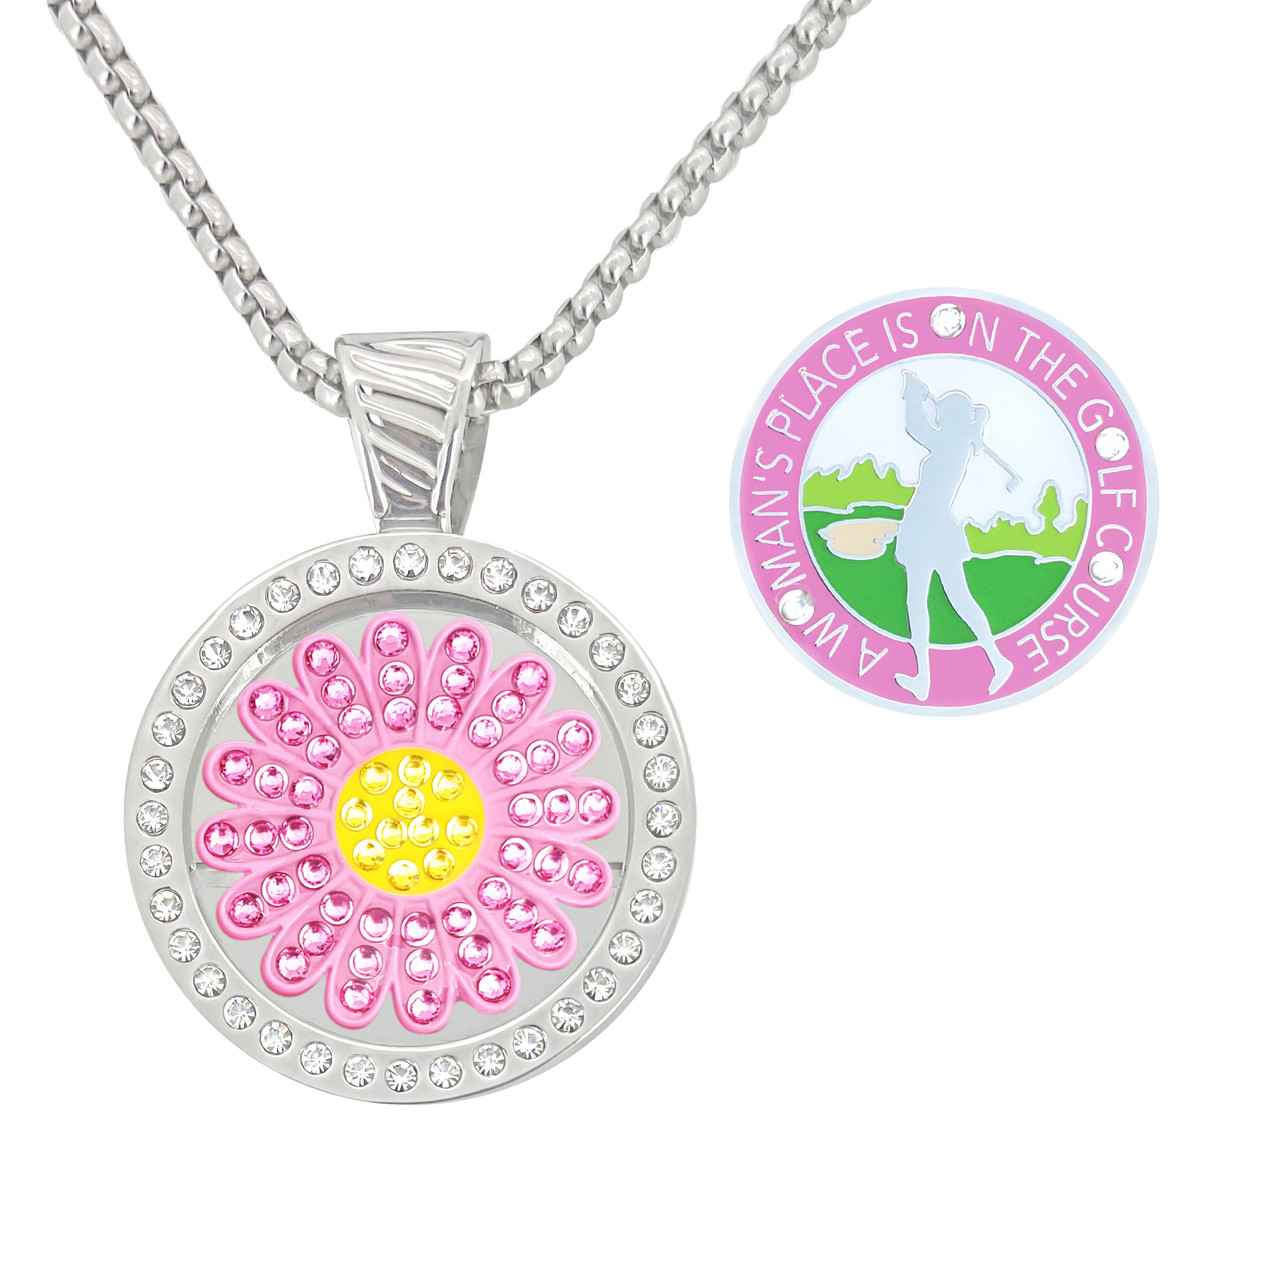 Women's Magnetic Golf Ball Marker Necklace Gold